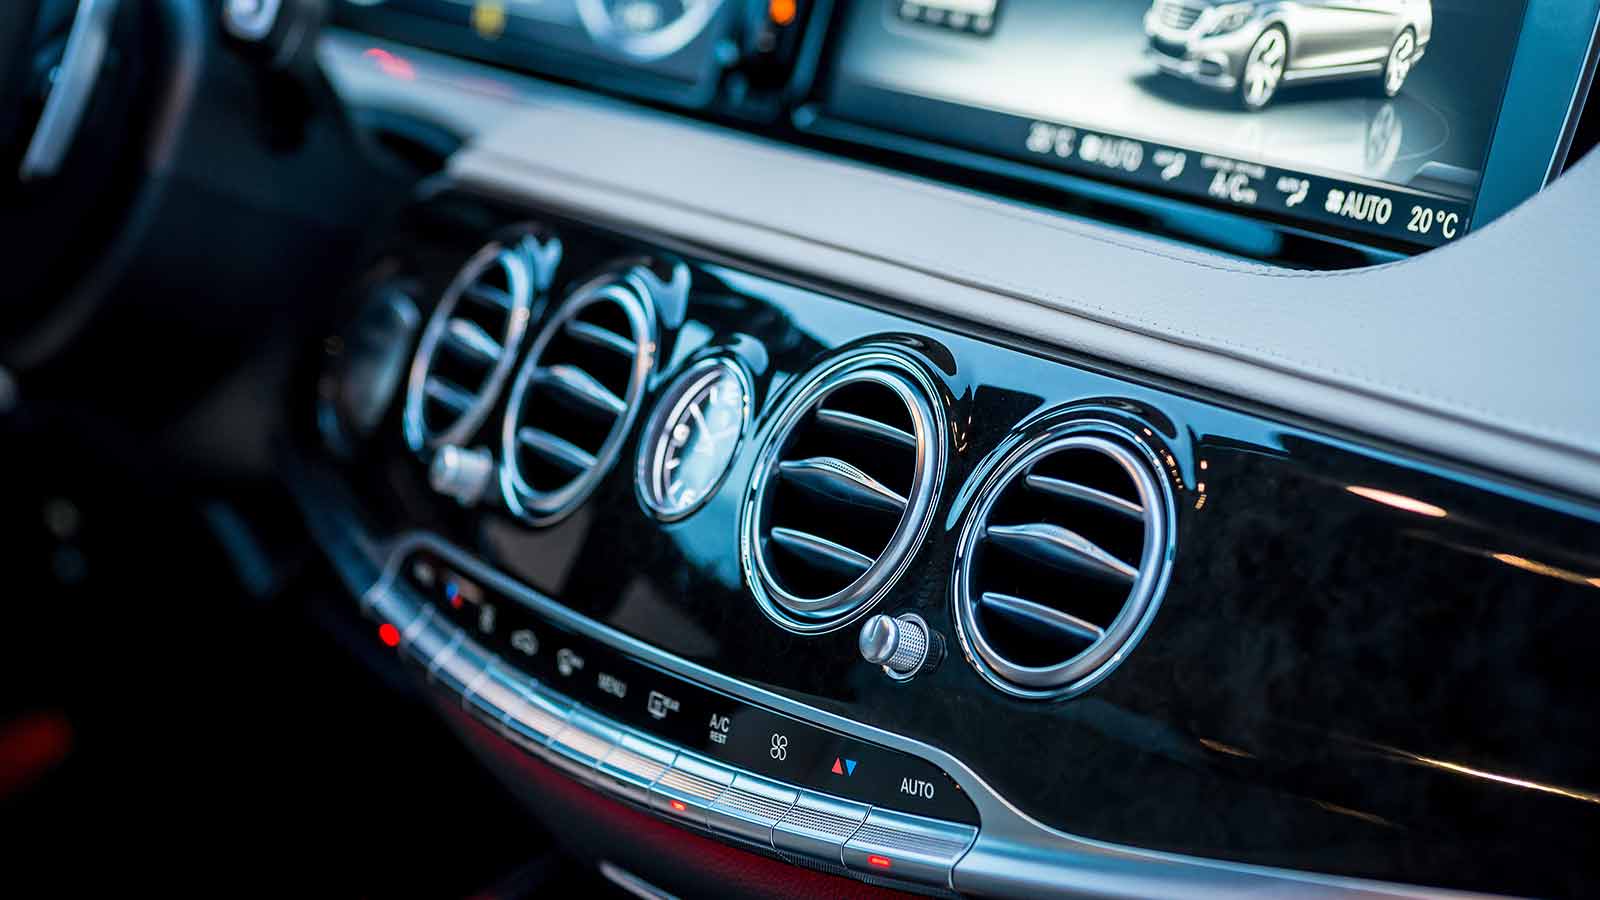 Key Aspects You Need to Know About Car Air-Conditioning